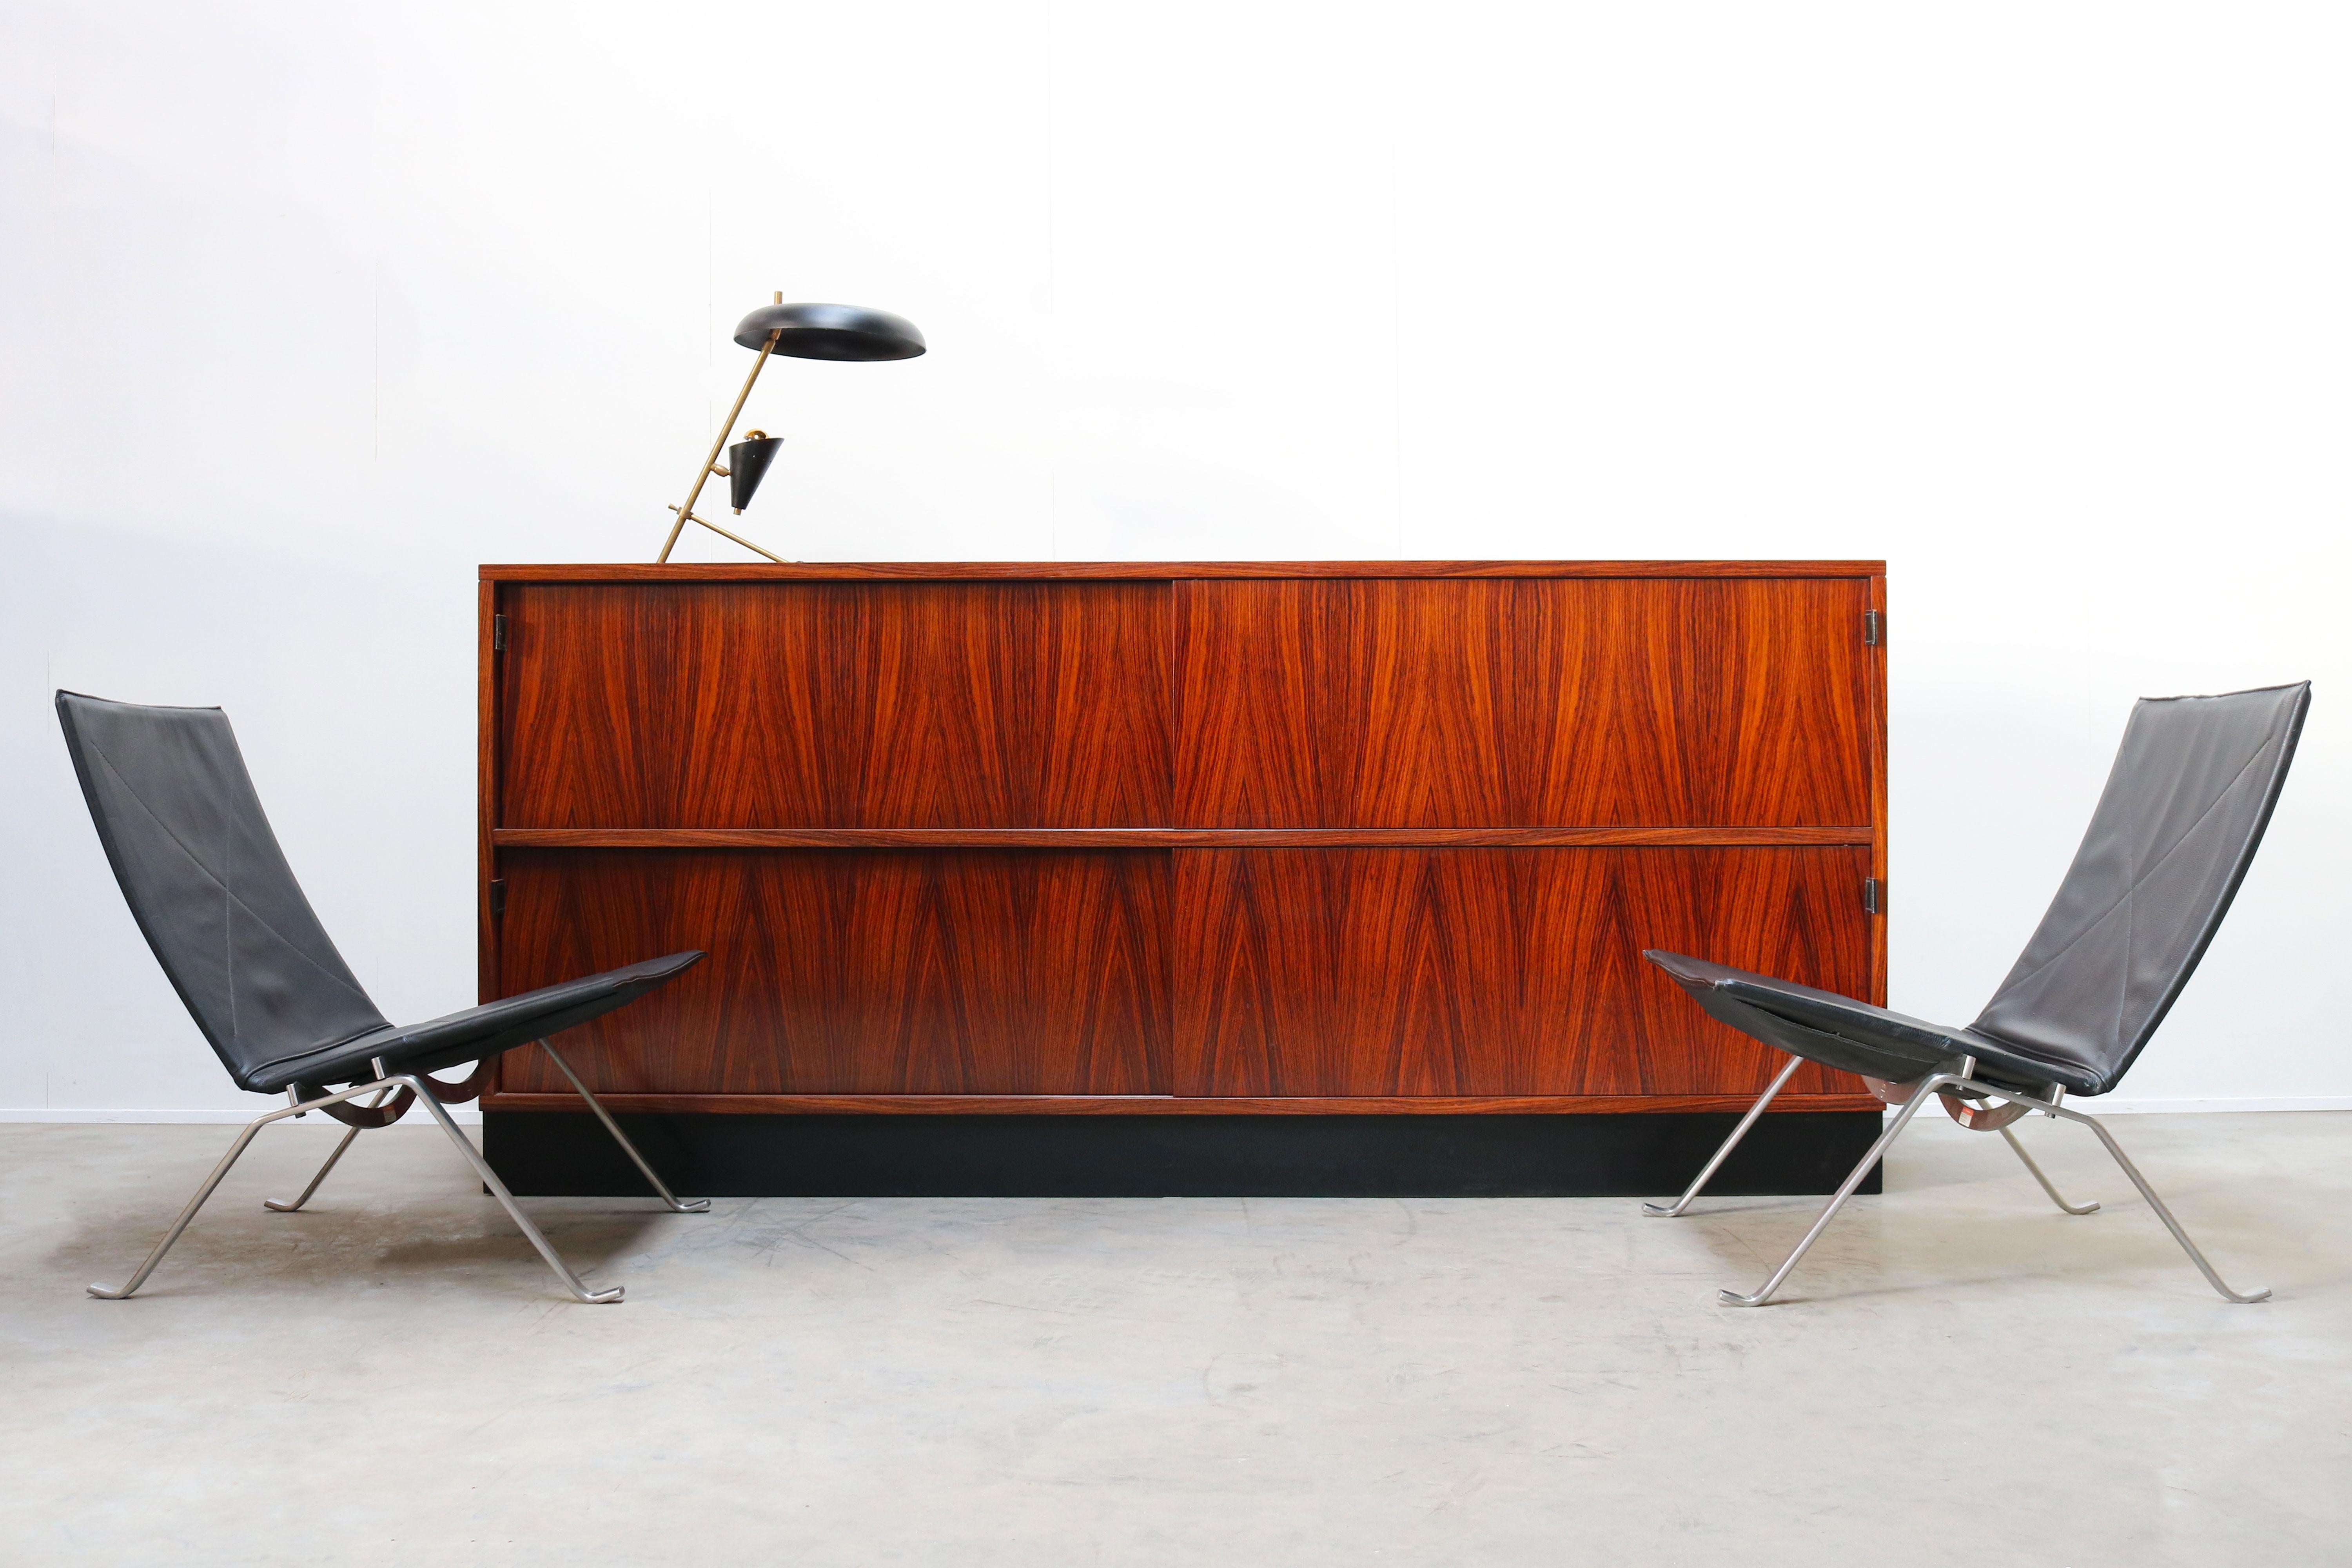 Magnificent large rosewood sideboard by Florence Knoll for Knoll International in the 1950s. The sideboard has 4 sliding doors with black leather grips. Wonderful rosewood grain that looks Royal and warm. The rosewood combines perfectly with the